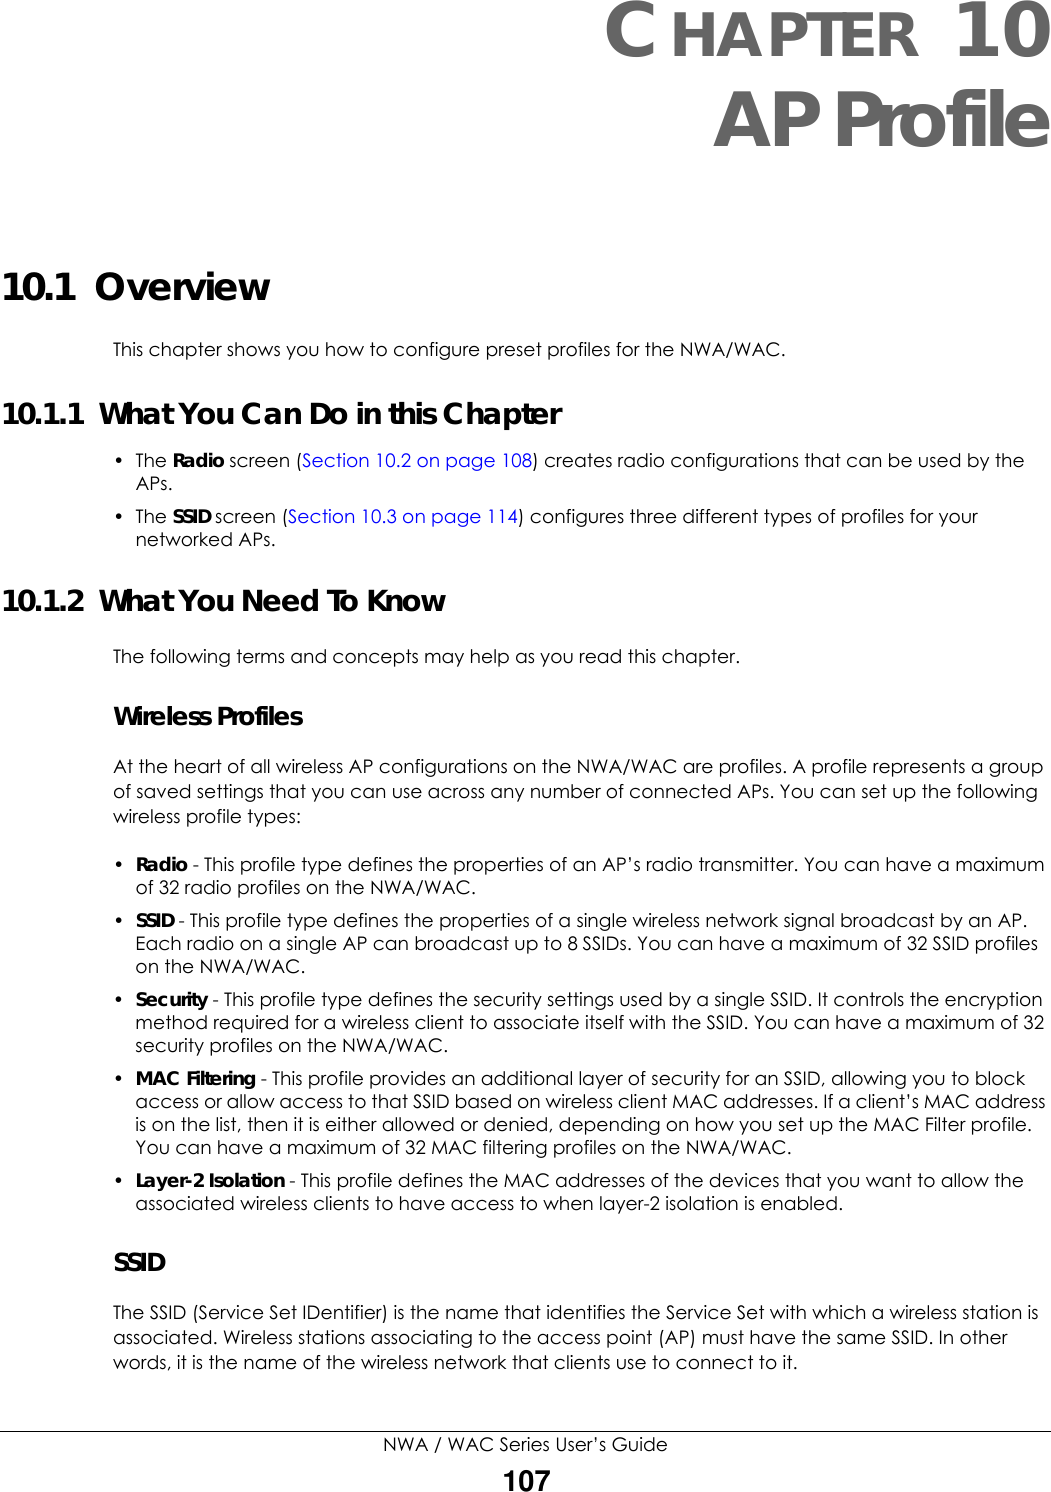 NWA / WAC Series User’s Guide107CHAPTER 10AP Profile10.1  OverviewThis chapter shows you how to configure preset profiles for the NWA/WAC. 10.1.1  What You Can Do in this Chapter• The Radio screen (Section 10.2 on page 108) creates radio configurations that can be used by the APs.• The SSID screen (Section 10.3 on page 114) configures three different types of profiles for your networked APs.10.1.2  What You Need To KnowThe following terms and concepts may help as you read this chapter.Wireless ProfilesAt the heart of all wireless AP configurations on the NWA/WAC are profiles. A profile represents a group of saved settings that you can use across any number of connected APs. You can set up the following wireless profile types:•Radio - This profile type defines the properties of an AP’s radio transmitter. You can have a maximum of 32 radio profiles on the NWA/WAC.•SSID - This profile type defines the properties of a single wireless network signal broadcast by an AP. Each radio on a single AP can broadcast up to 8 SSIDs. You can have a maximum of 32 SSID profiles on the NWA/WAC.•Security - This profile type defines the security settings used by a single SSID. It controls the encryption method required for a wireless client to associate itself with the SSID. You can have a maximum of 32 security profiles on the NWA/WAC.•MAC Filtering - This profile provides an additional layer of security for an SSID, allowing you to block access or allow access to that SSID based on wireless client MAC addresses. If a client’s MAC address is on the list, then it is either allowed or denied, depending on how you set up the MAC Filter profile. You can have a maximum of 32 MAC filtering profiles on the NWA/WAC.•Layer-2 Isolation - This profile defines the MAC addresses of the devices that you want to allow the associated wireless clients to have access to when layer-2 isolation is enabled. SSIDThe SSID (Service Set IDentifier) is the name that identifies the Service Set with which a wireless station is associated. Wireless stations associating to the access point (AP) must have the same SSID. In other words, it is the name of the wireless network that clients use to connect to it.